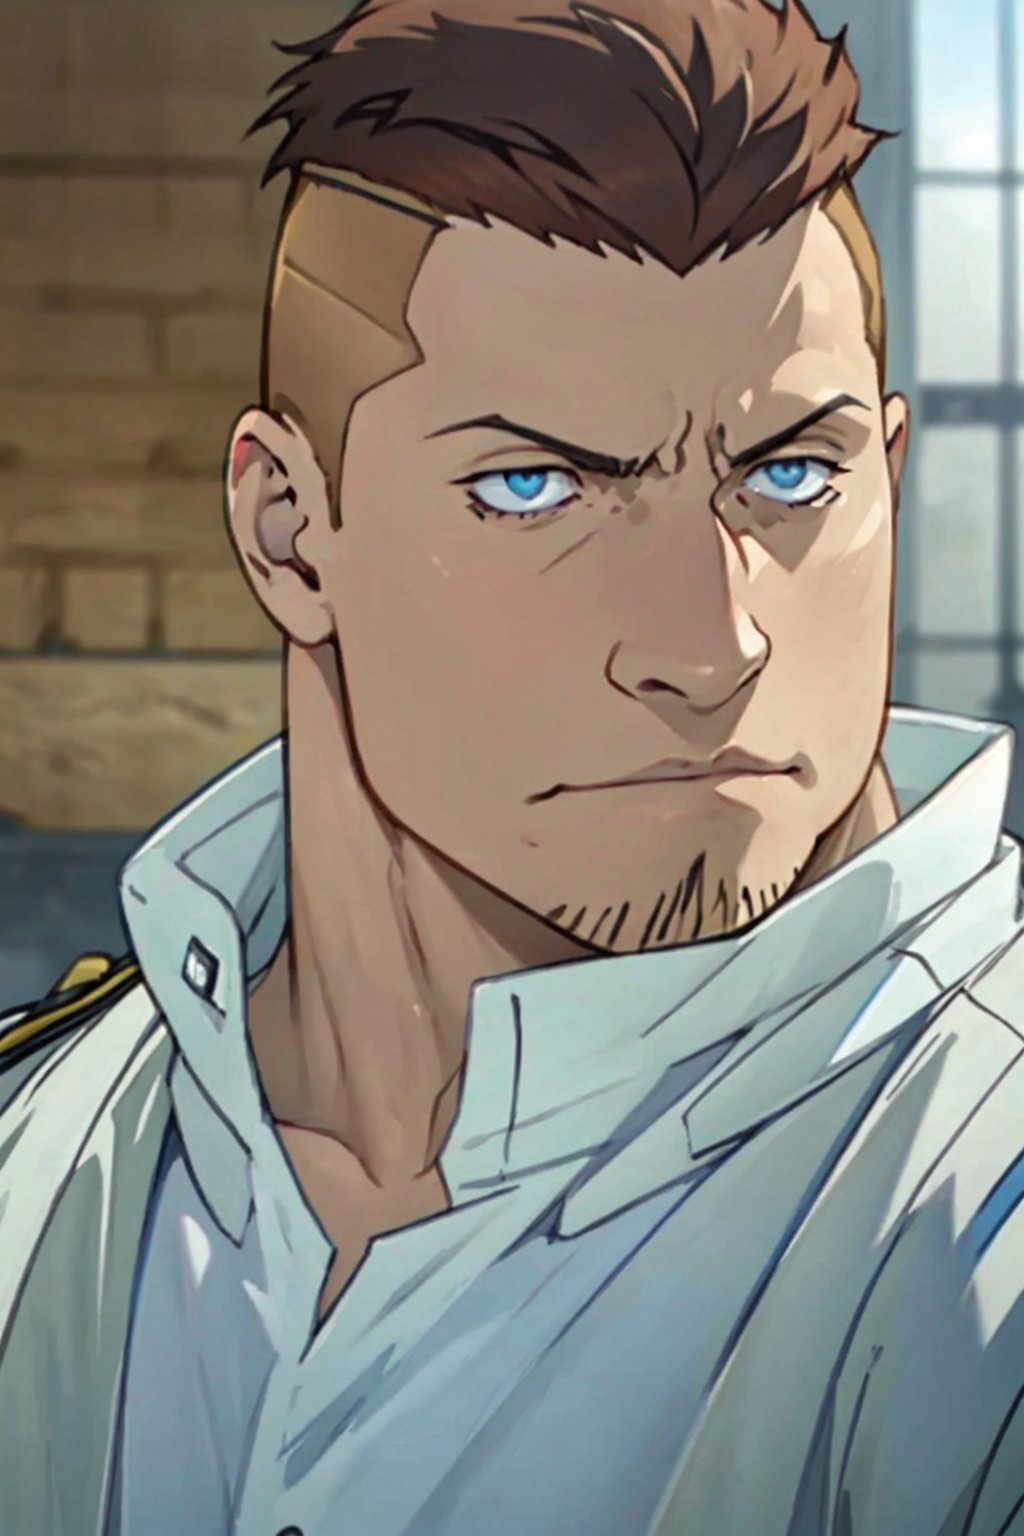 (1 image only), solo male, 1boy, Heymans Breda, Fullmetal Alchemist, anime, 2D, blue eyes, brown hair, short hair, high fade, stubble, handsome, chubby, open blue military uniform, white shirt, masculine, confidence, charming, alluring, upper body in frame, perfect anatomy, perfect proportions, 8k, HQ, (best quality:1.2, hyperrealistic:1.2, photorealistic:1.2, masterpiece:1.3, madly detailed photo:1.2), (hyper-realistic lifelike texture:1.2, realistic eyes:1.2), high_resolution, perfect eye pupil, dutch angle